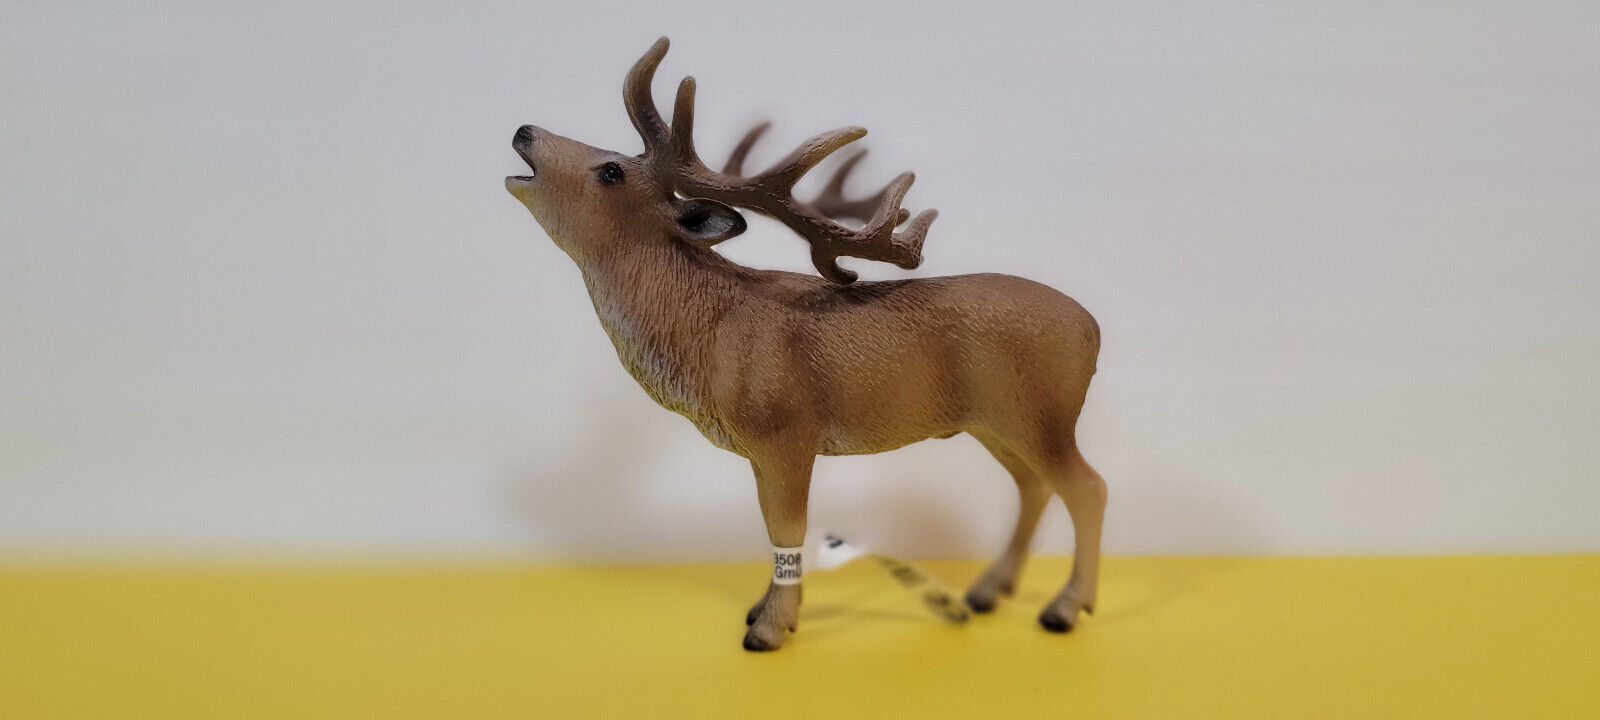 SCHLEICH 2010 RED DEER BUCK STAG Figurine 14647 VERY RARE RETIRED with TAG